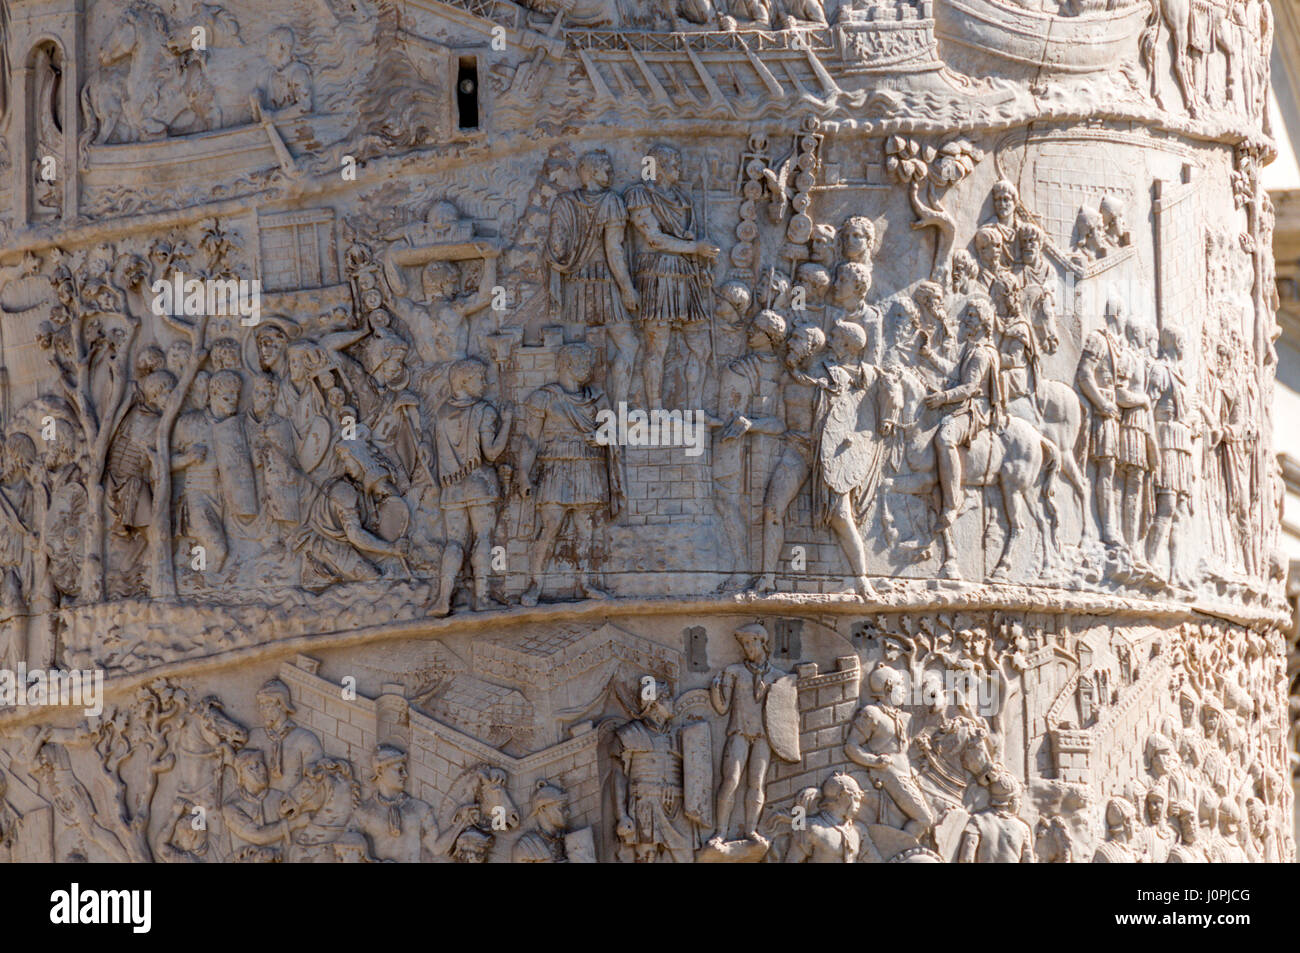 Trajan's Column, Rome, Italy - detail of the carvings Stock Photo